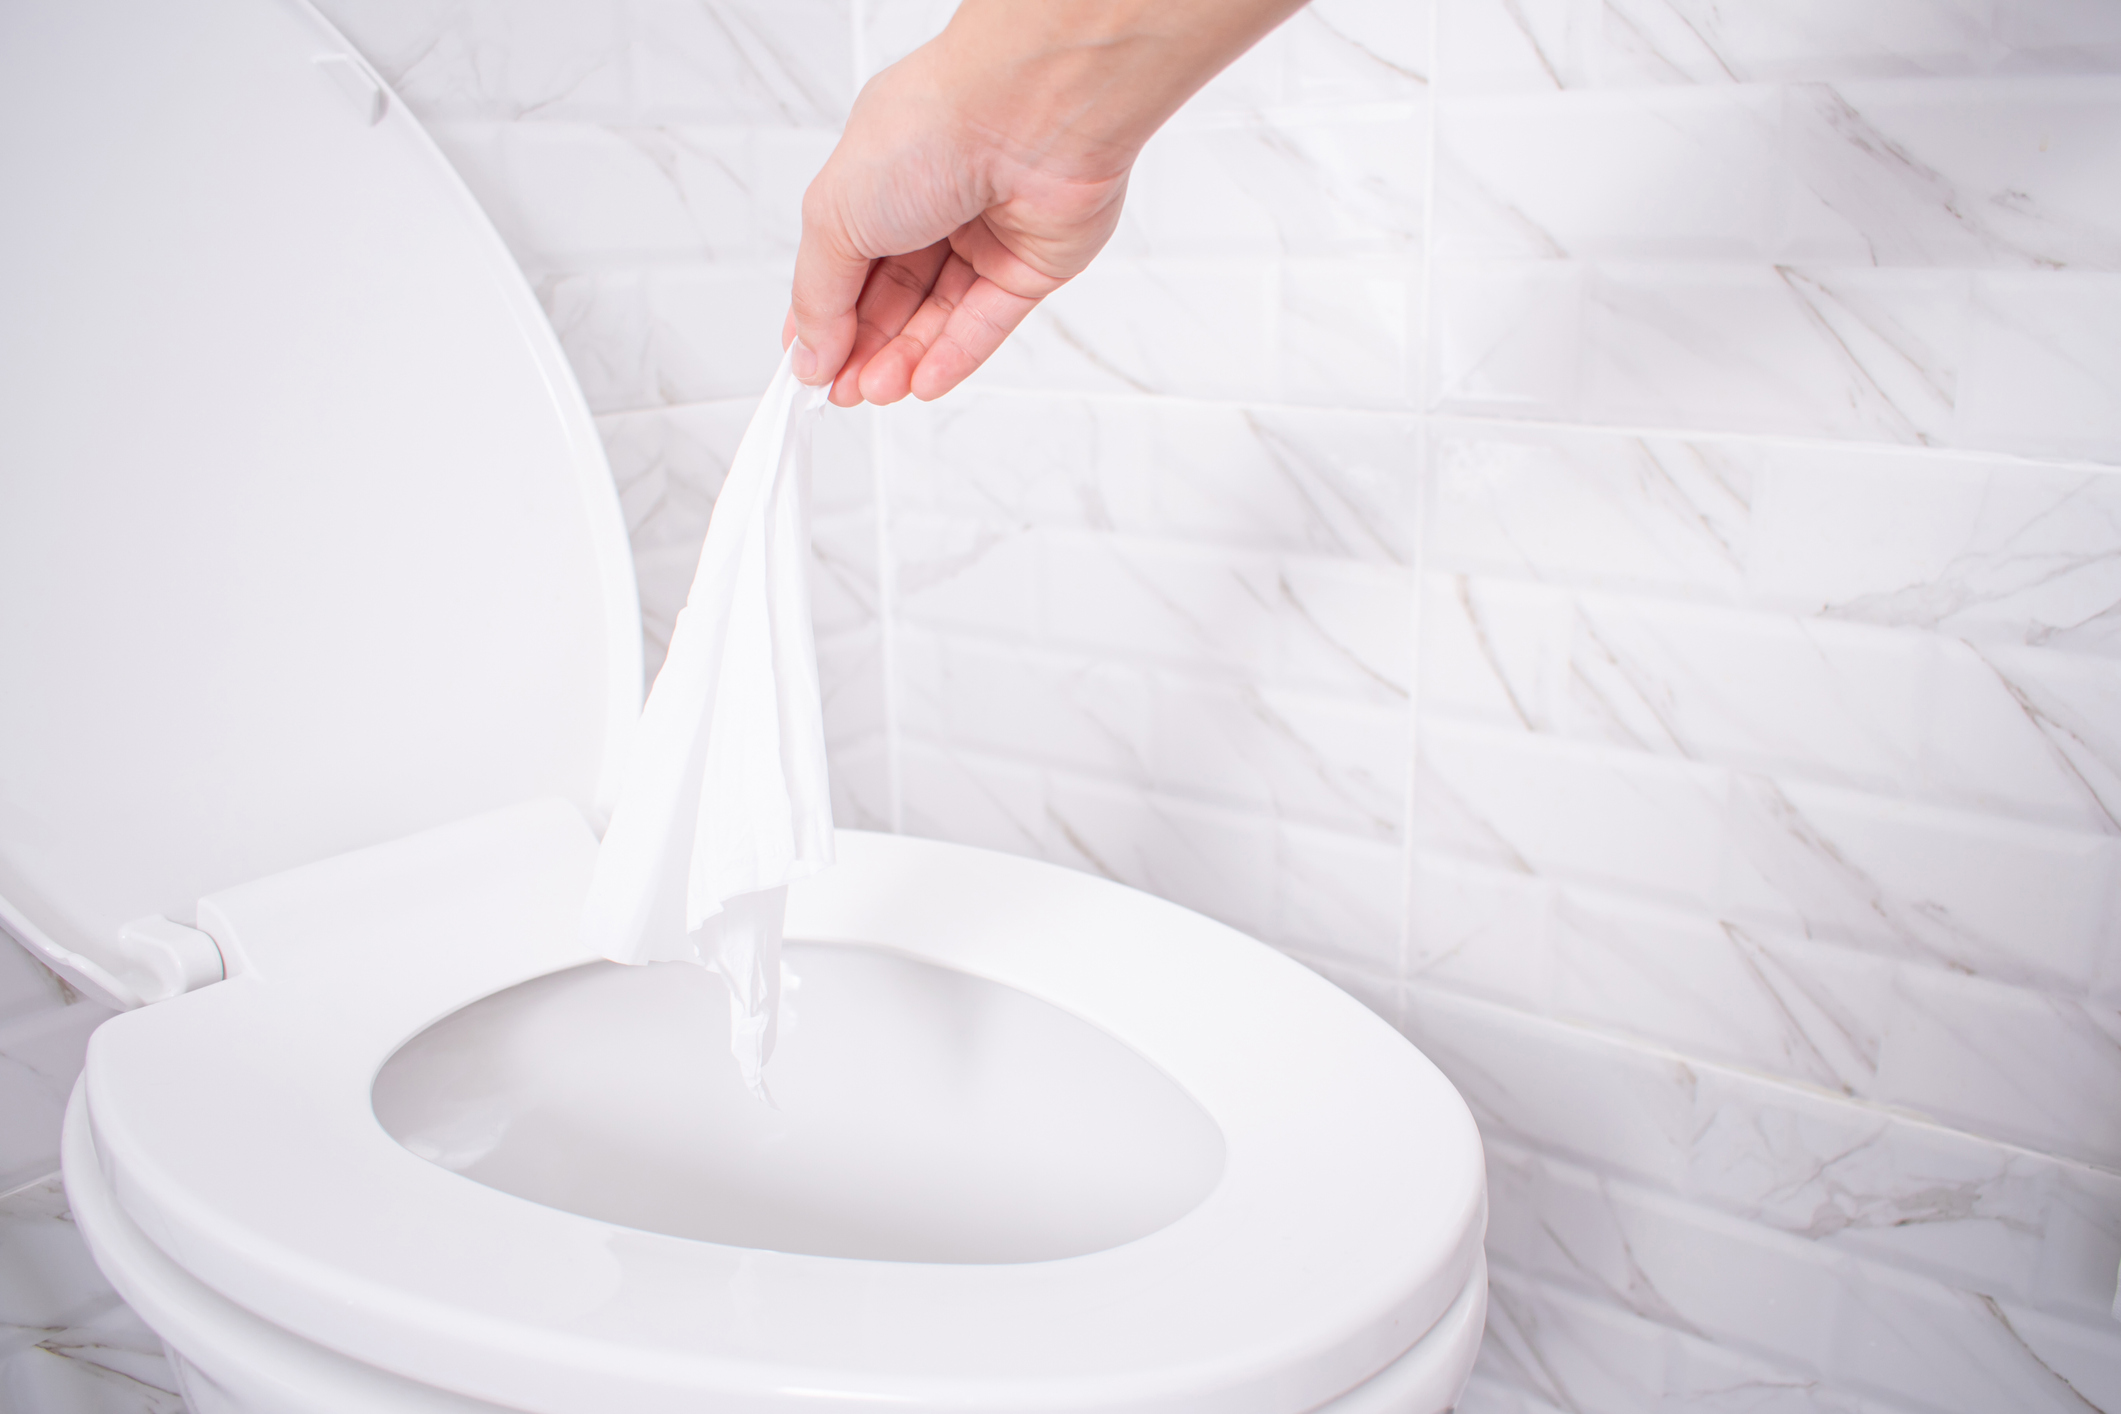 Can You Flush Flushable Wipes?